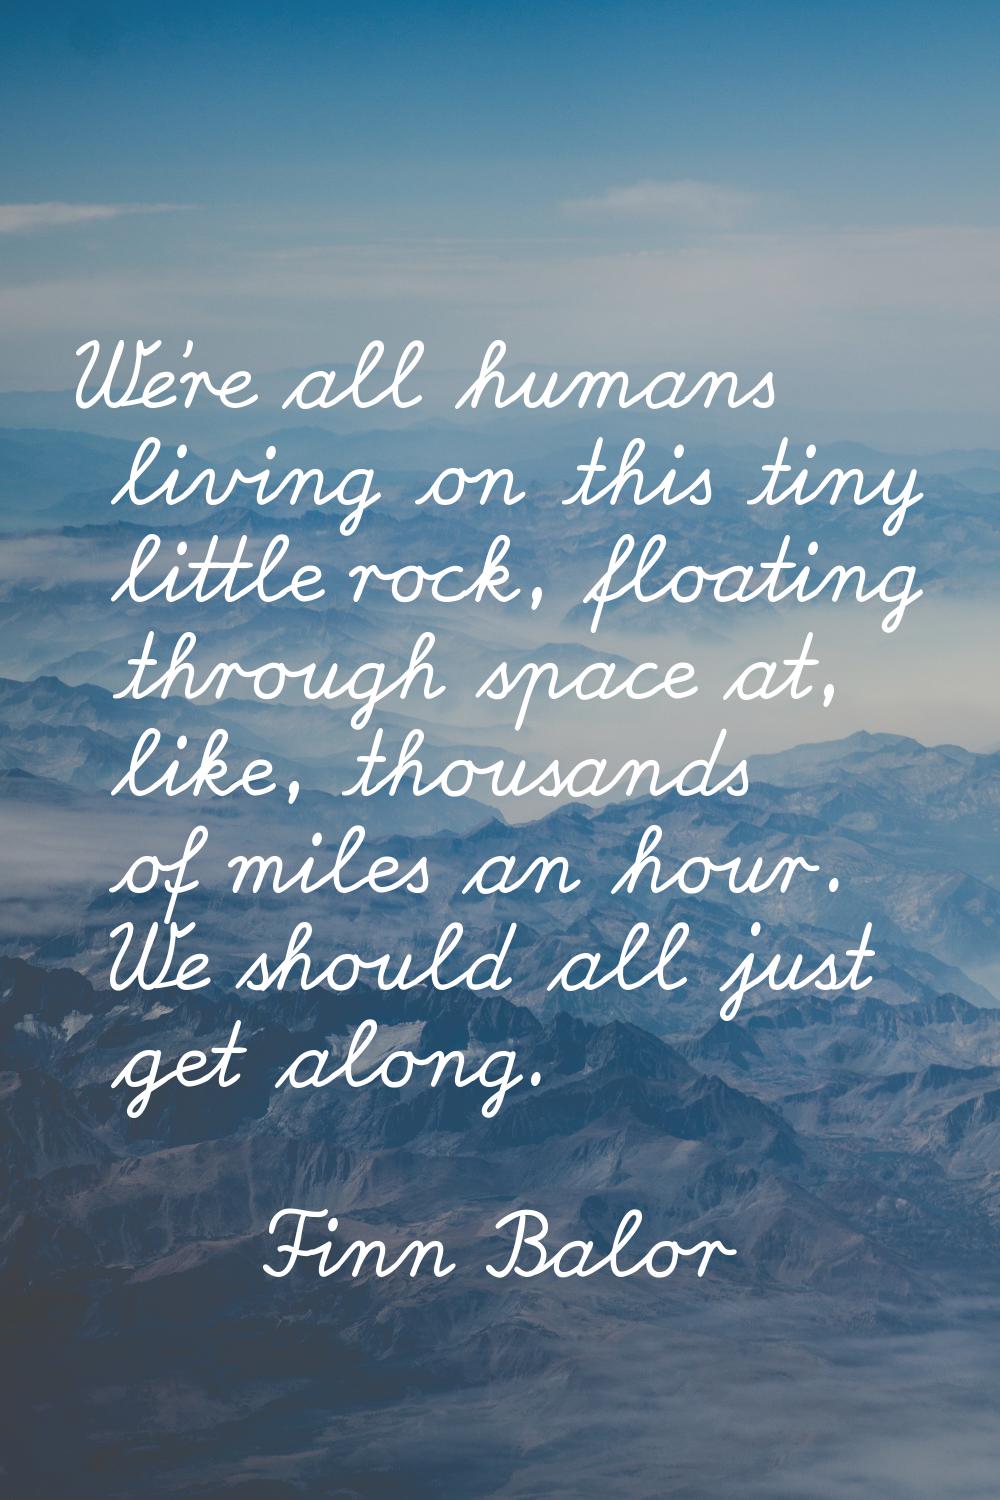 We're all humans living on this tiny little rock, floating through space at, like, thousands of mil